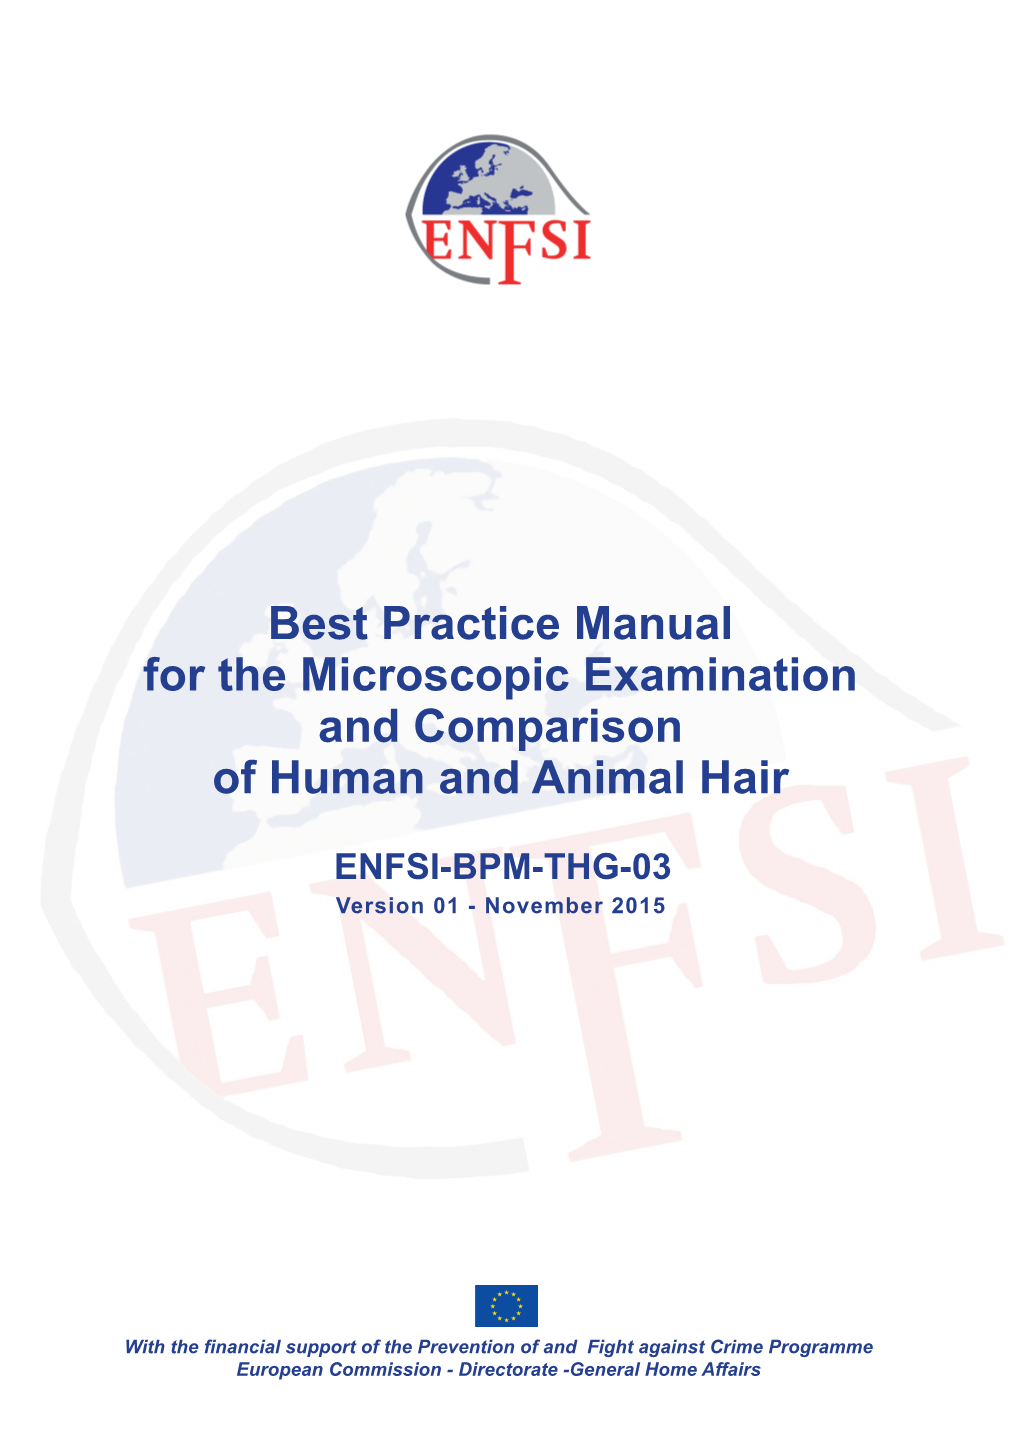 Best Practice Manual for the Microscopic Examination of Human